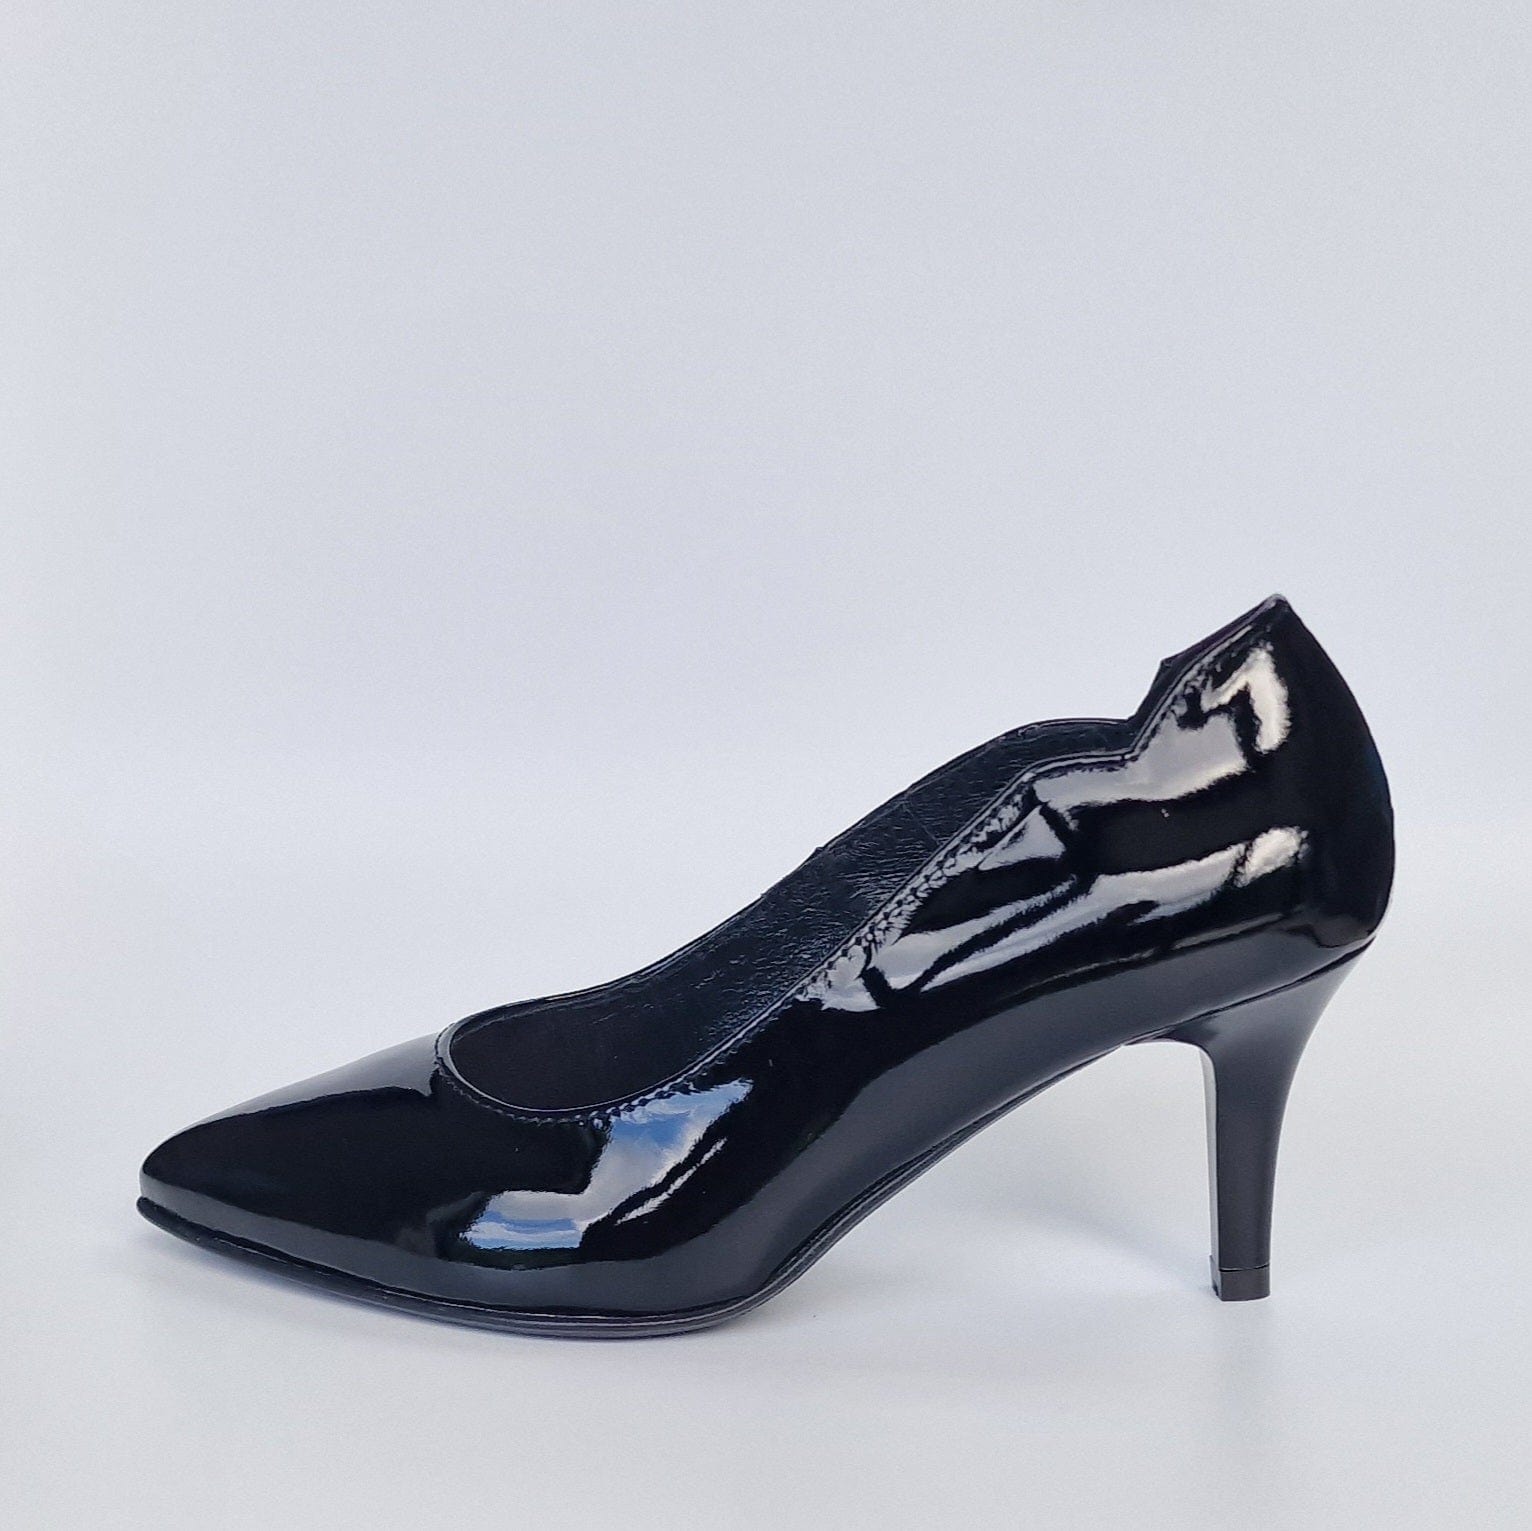 Petite size court heels in black patent leather 